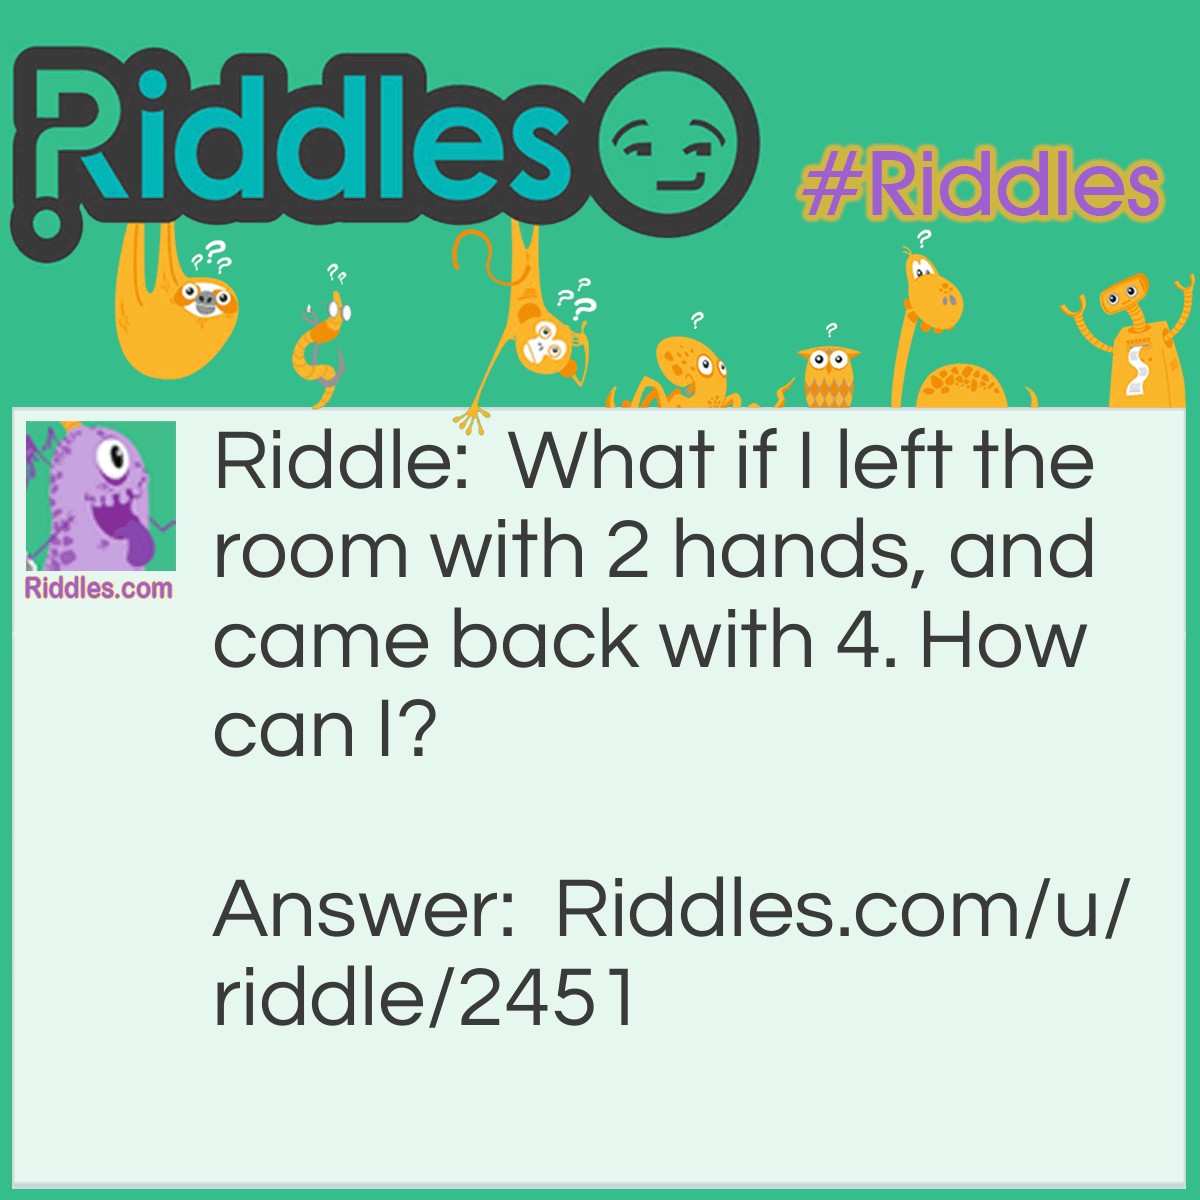 Riddle: What if I left the room with 2 hands, and came back with 4. How can I? Answer: I can bring in an analog clock back with me.